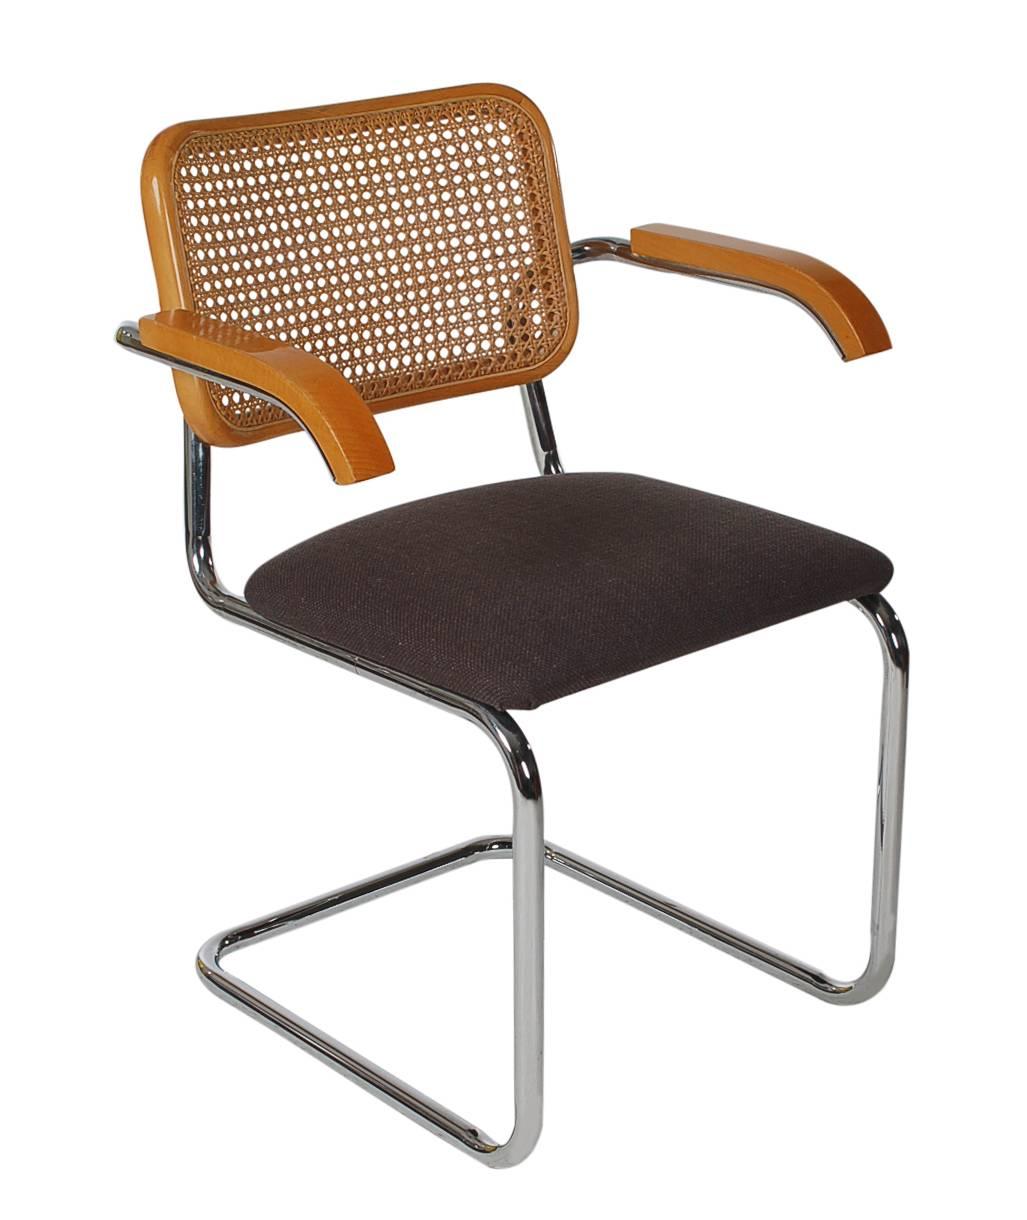 A super clean vintage set of four Cesca dining chairs designed by Marcel Breuer and produced by Knoll, circa 1980s. They feature chrome-plated tubular frames, maple wood details, cane backs and recently upholstered charcoal tweed seat cushions.